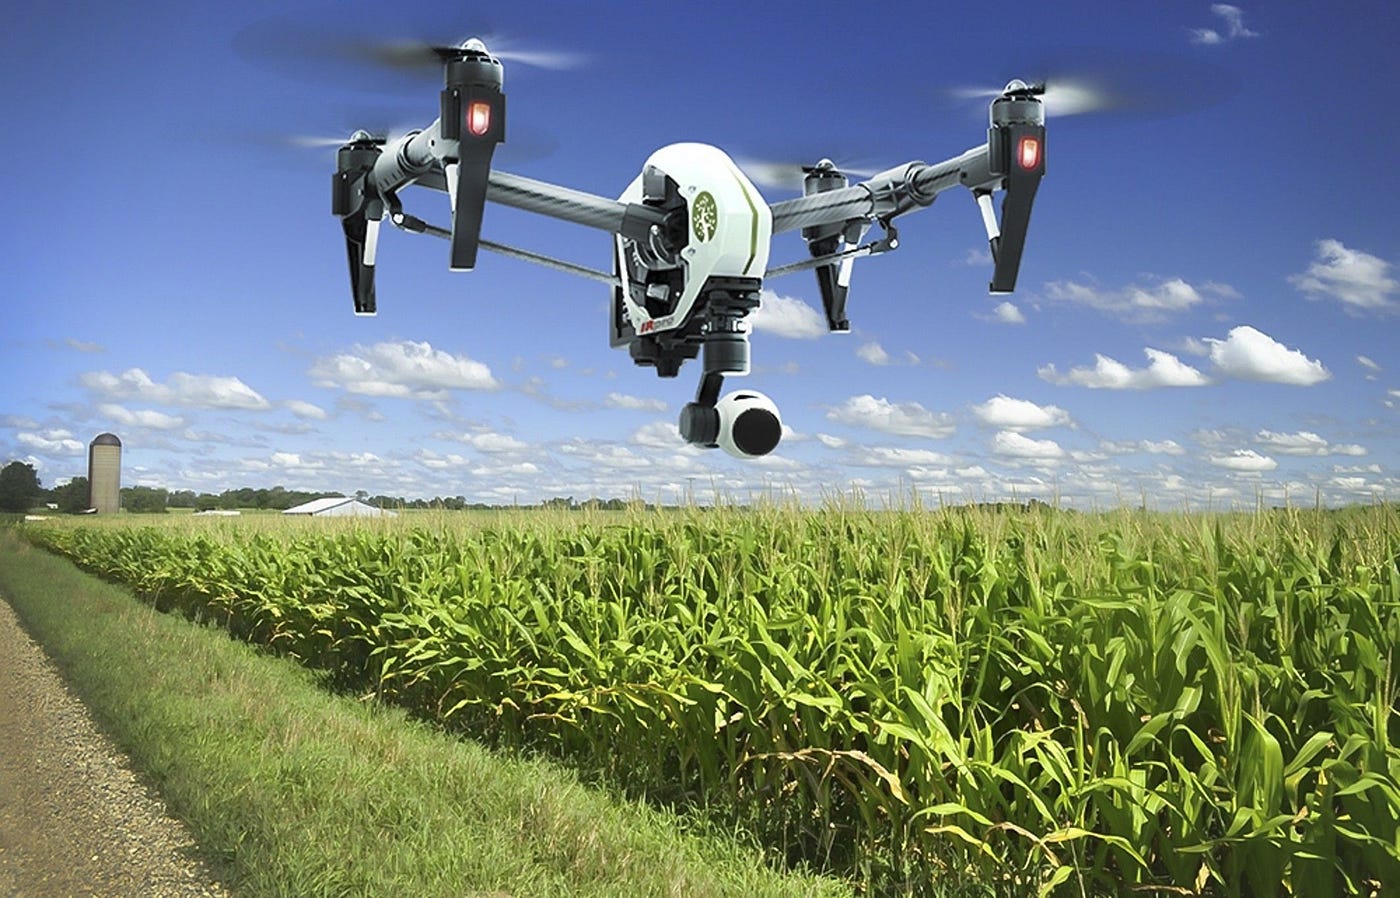 Over 200,000 DJI agriculture drones in use globally: Report